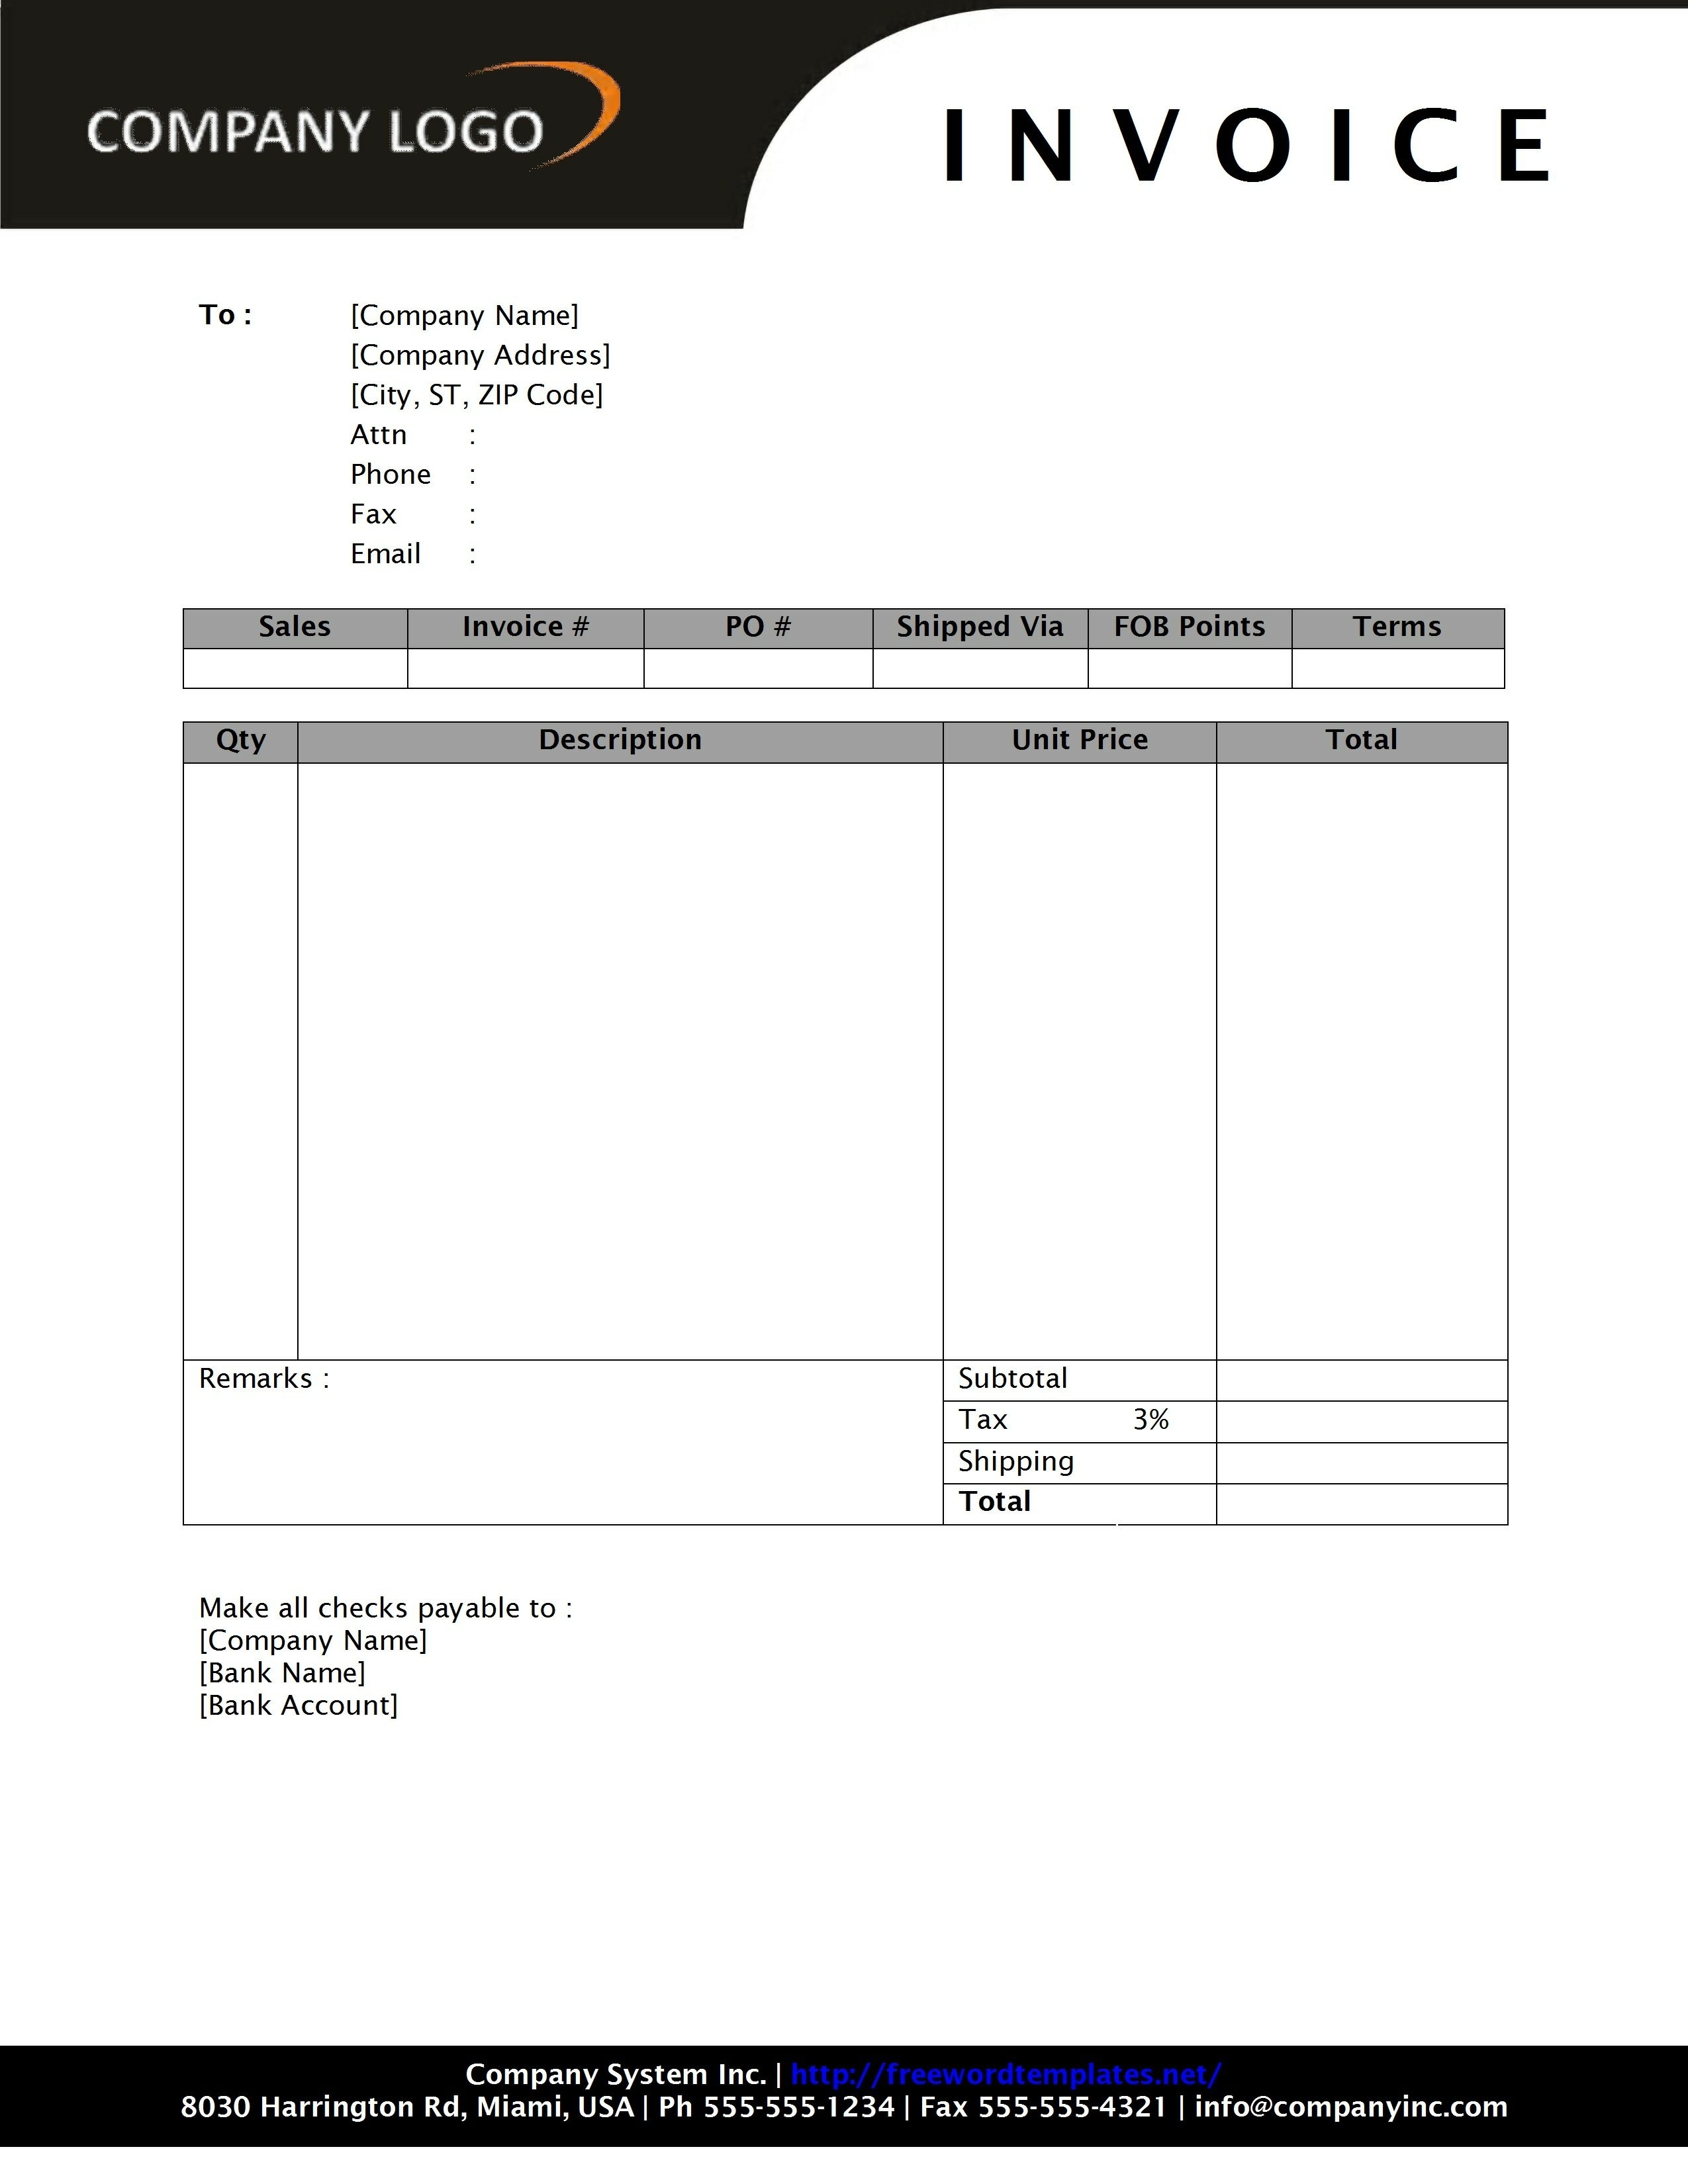 template for invoice free download invoice template free 2016 free download invoice